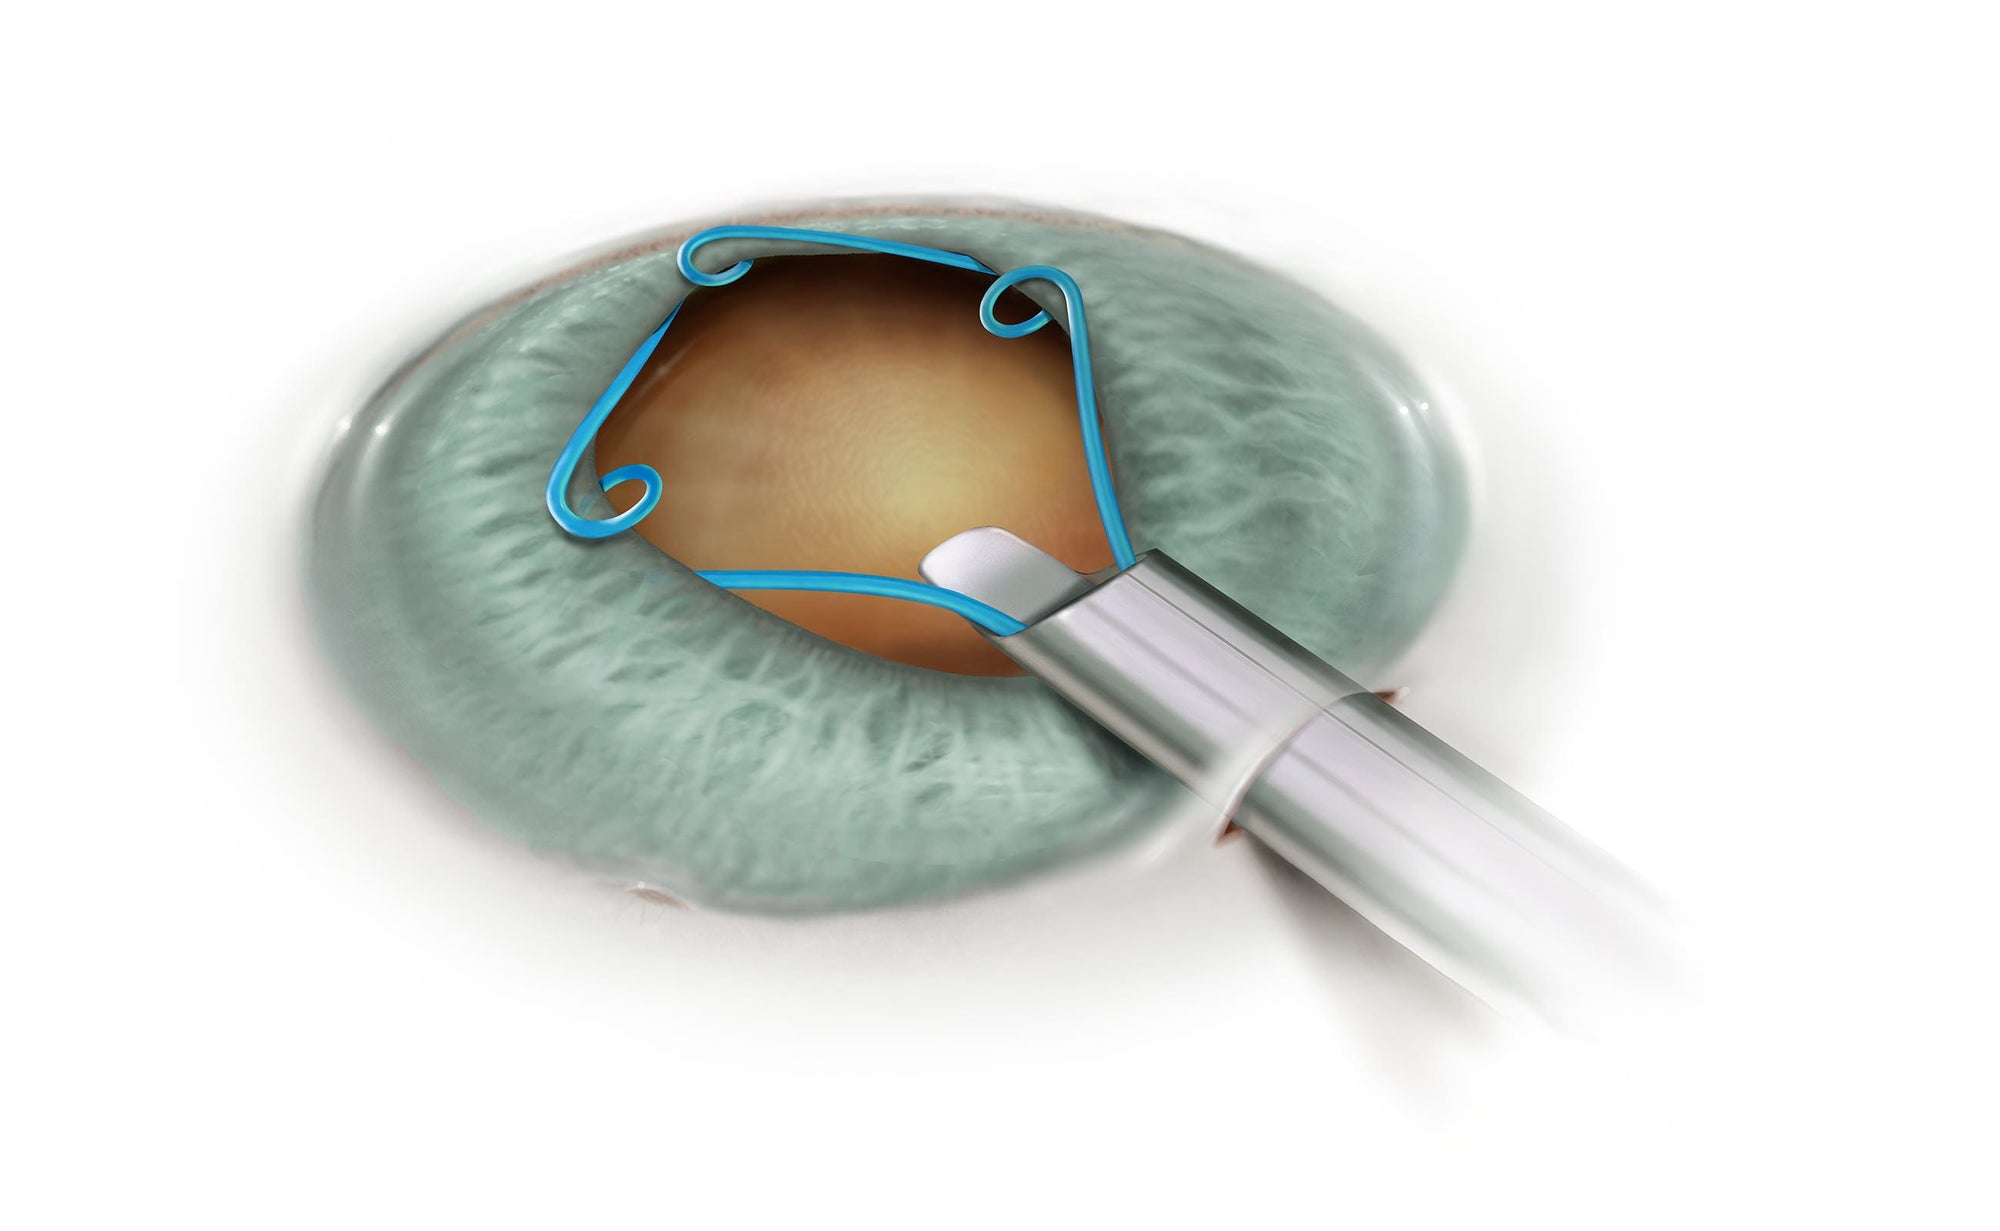 Why do Flomax commercials contain a warning about Cataract Surgery?